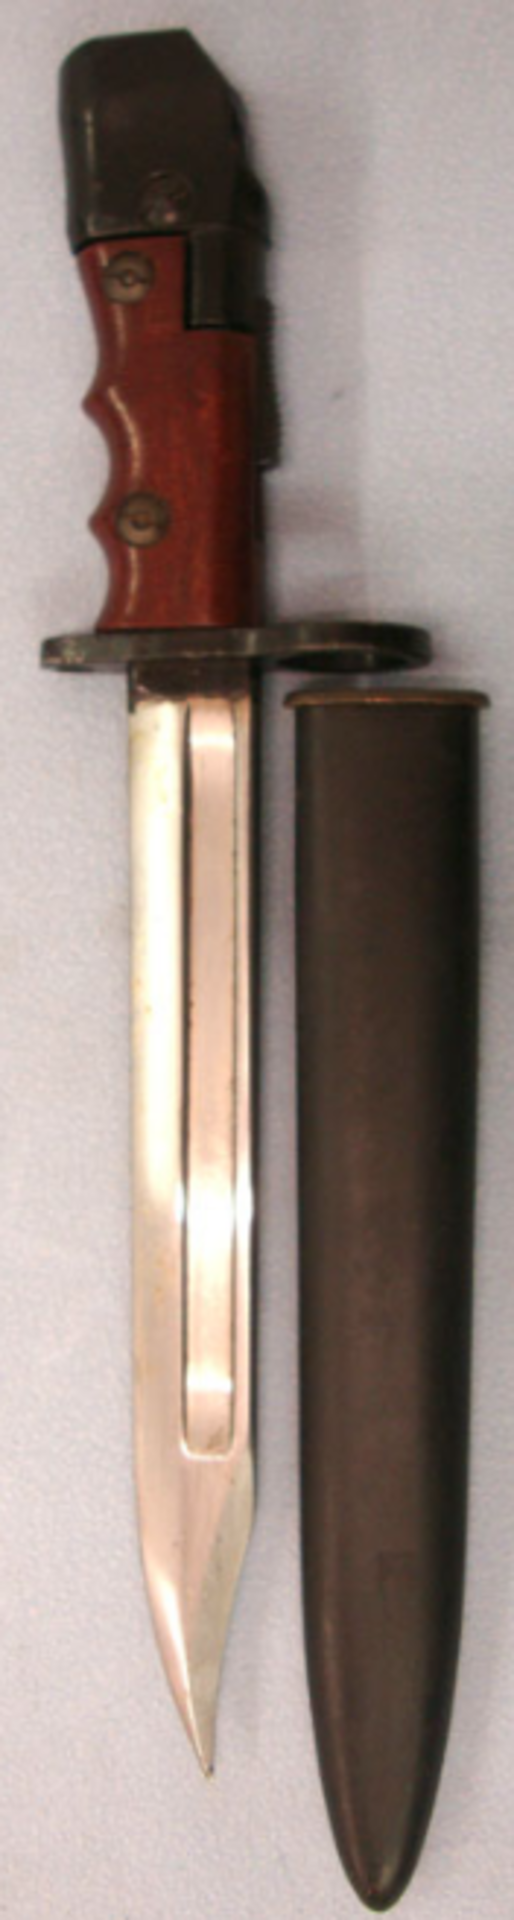 British No 7 MK 1/L Swivelling Pommel Bayonet With Red Composite Grips For No 4 Rifles and Scabbard